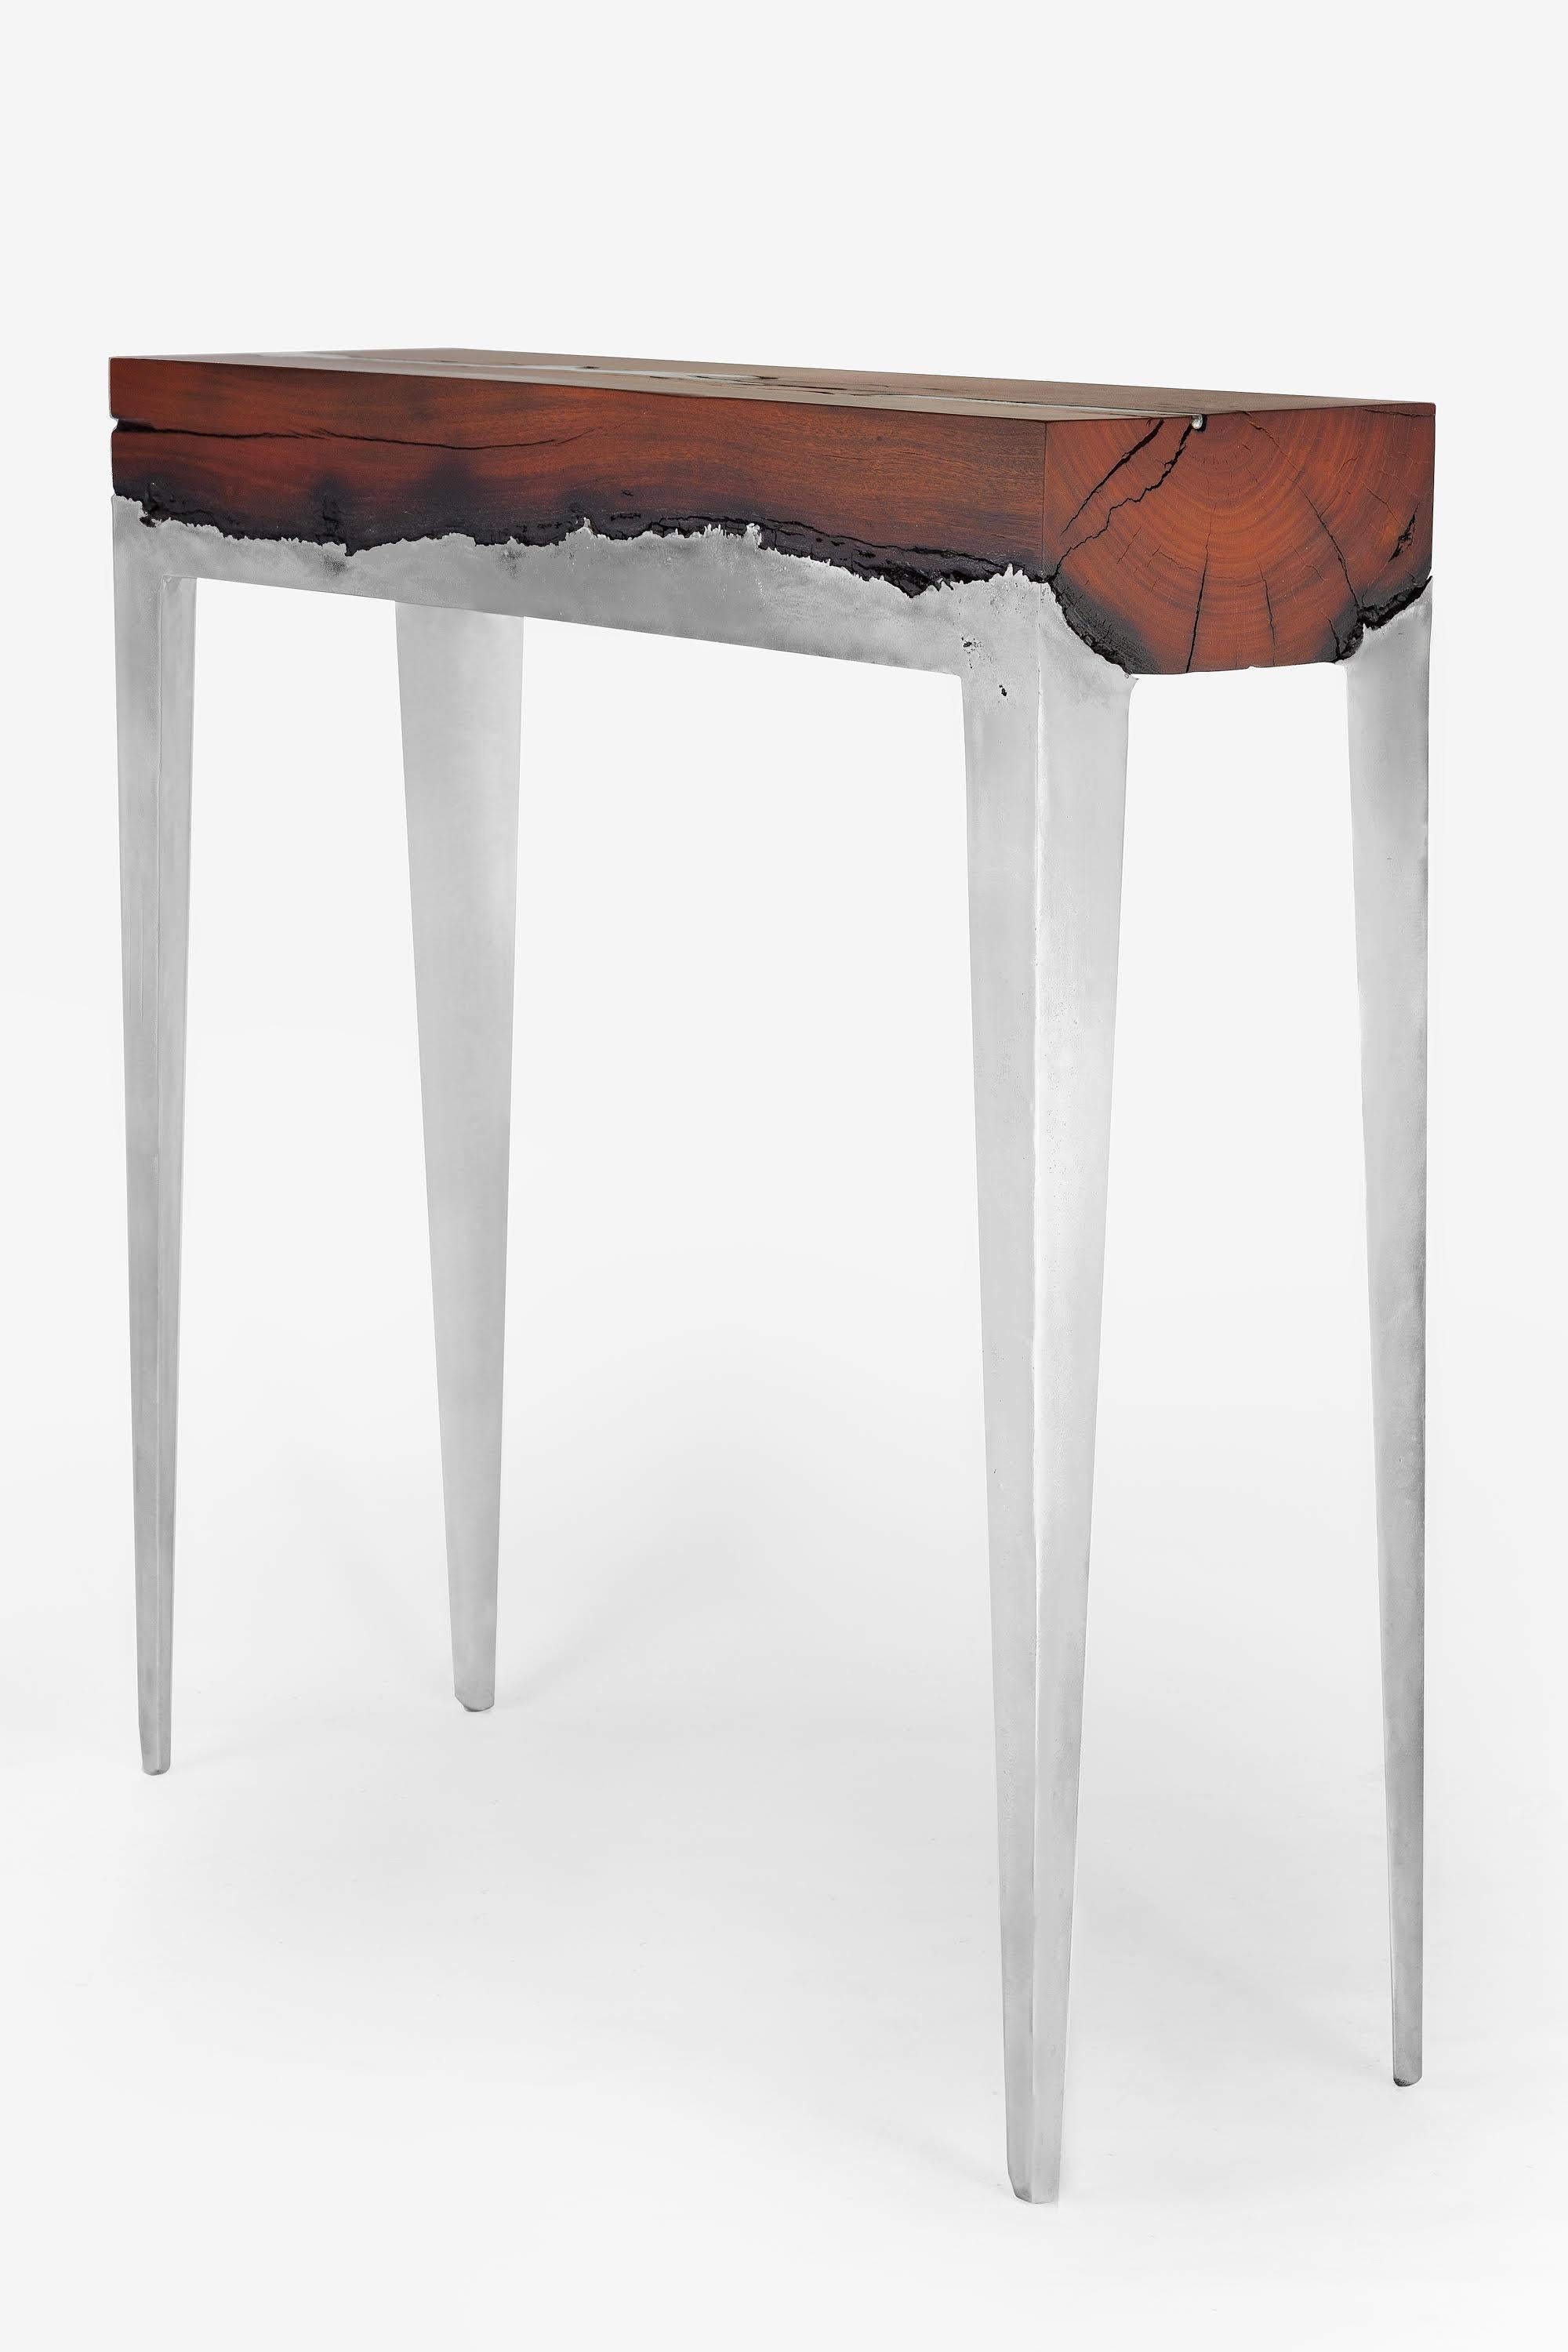 Console by Hilla Shamia. 
Eucalyptus and aluminium

Measure: 100 cm high, 100 cm length, 30 cm width
(39.3 in high, 39.3 in length, 11.8 in width)

Hilla Shamia first started working with this unique technology of casting metal into wood in 2012, as